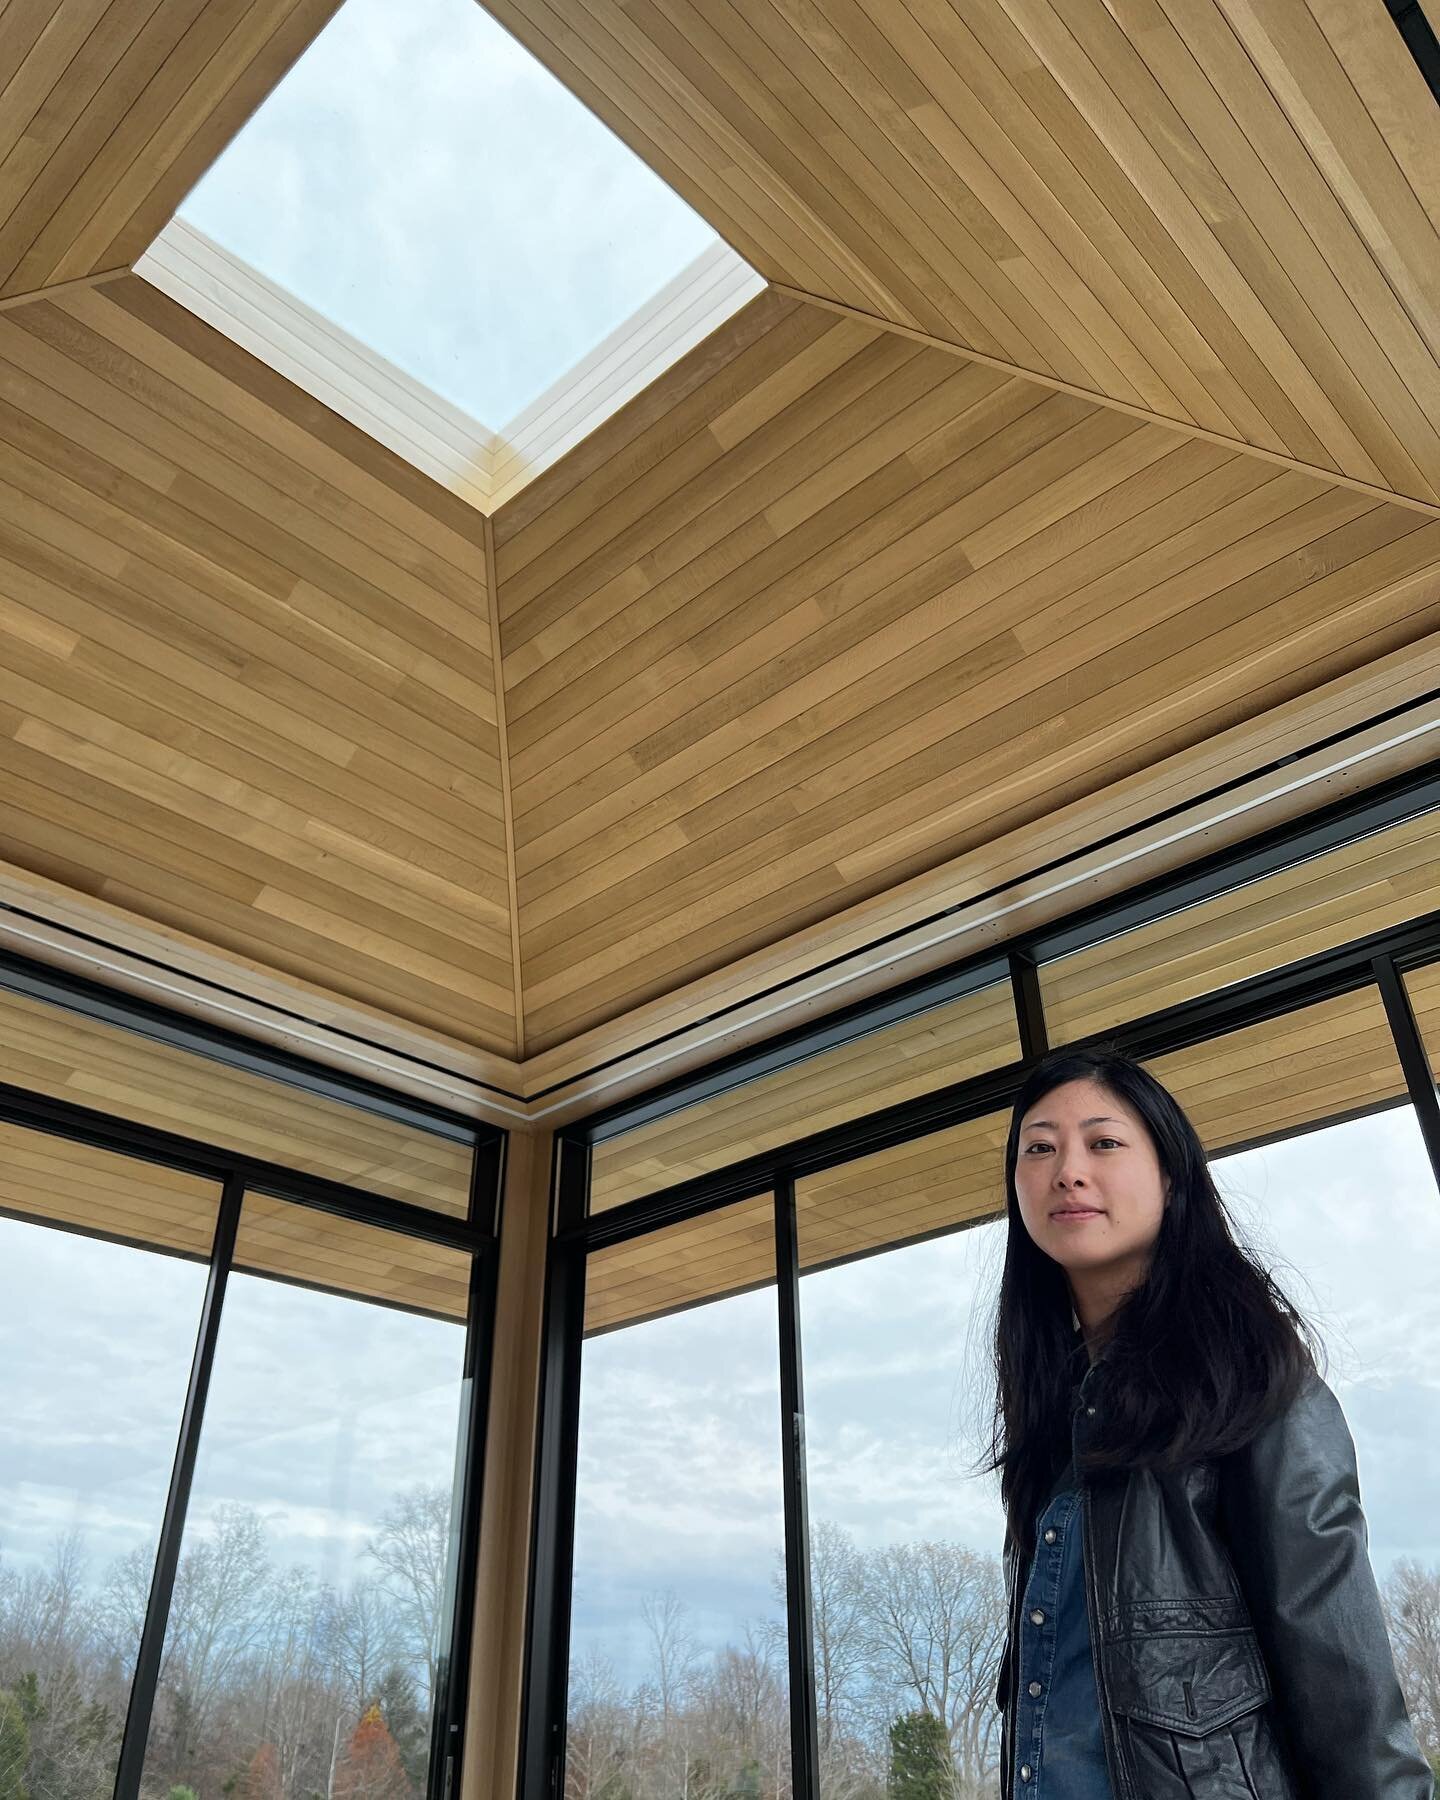 A warm welcome to @rokohana Hiroko Hanamura. She joined our team this week as a part time graduate architect. She graduated from @iu_architecture and is currently a Visiting Assistant Professor of Interior Design at @iuartanddesign. Yesterday we stop